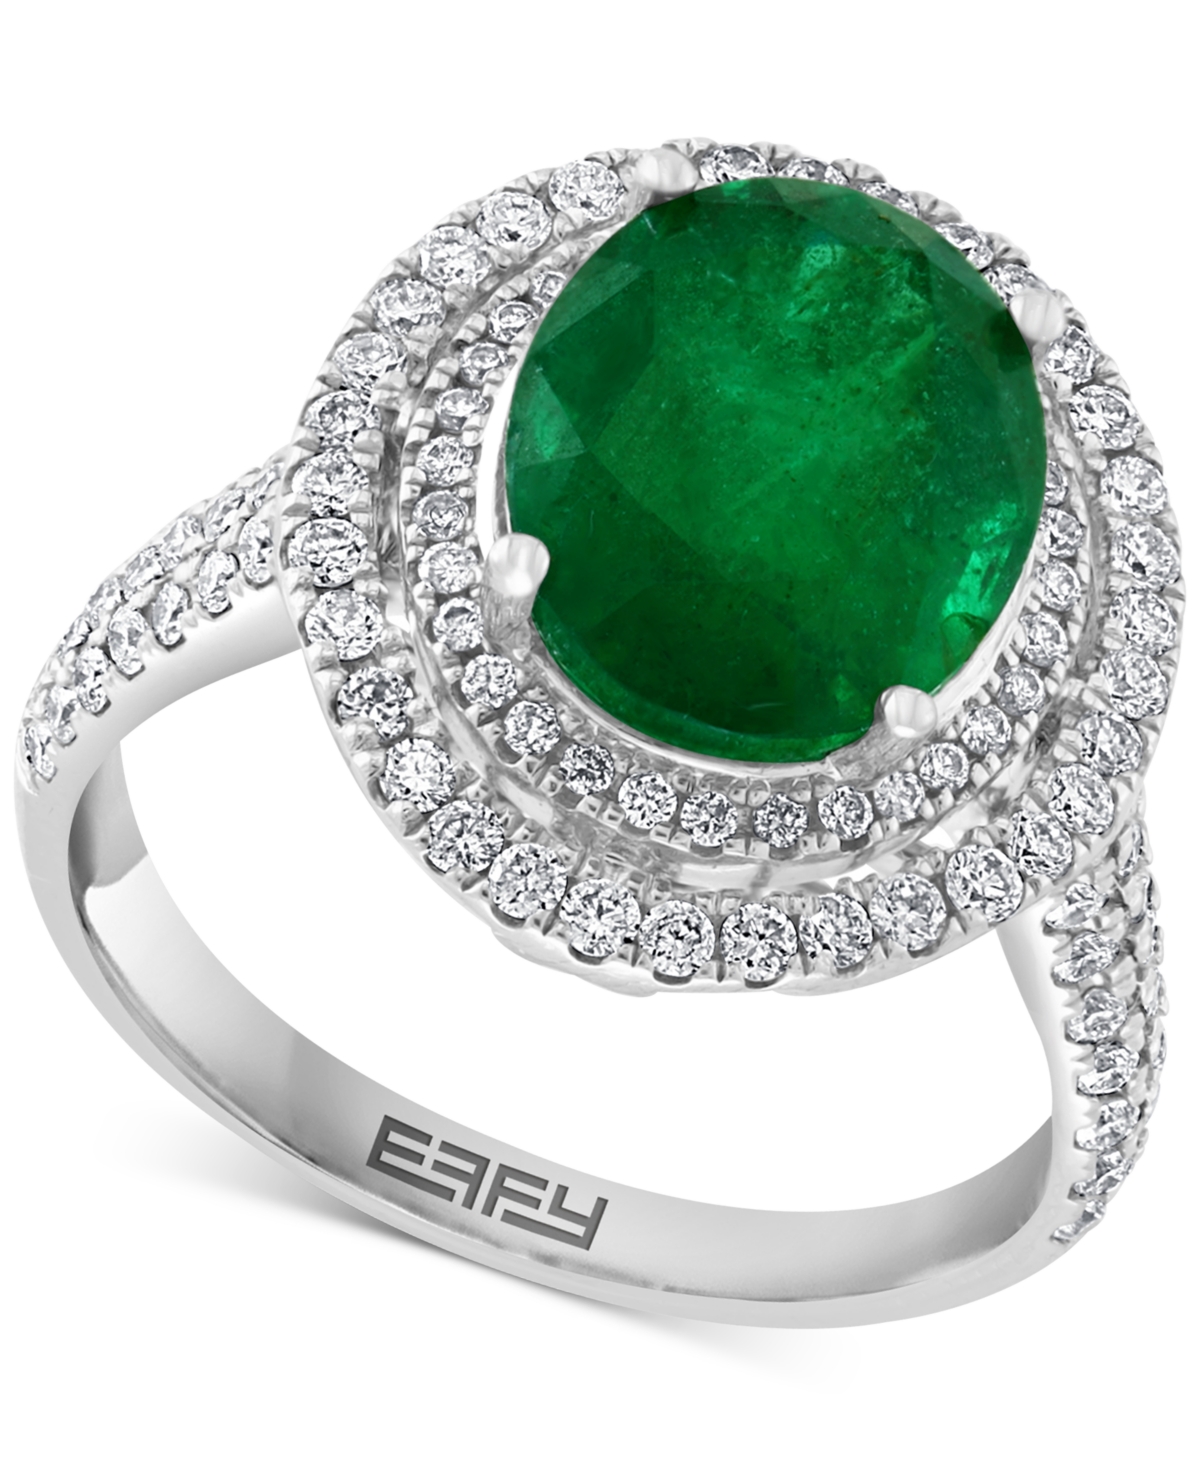 Effy Collection Effy Emerald (2-1/2 ct. t.w.) & Diamond (5/8 ct. t.w.) Ring in 14k White Gold